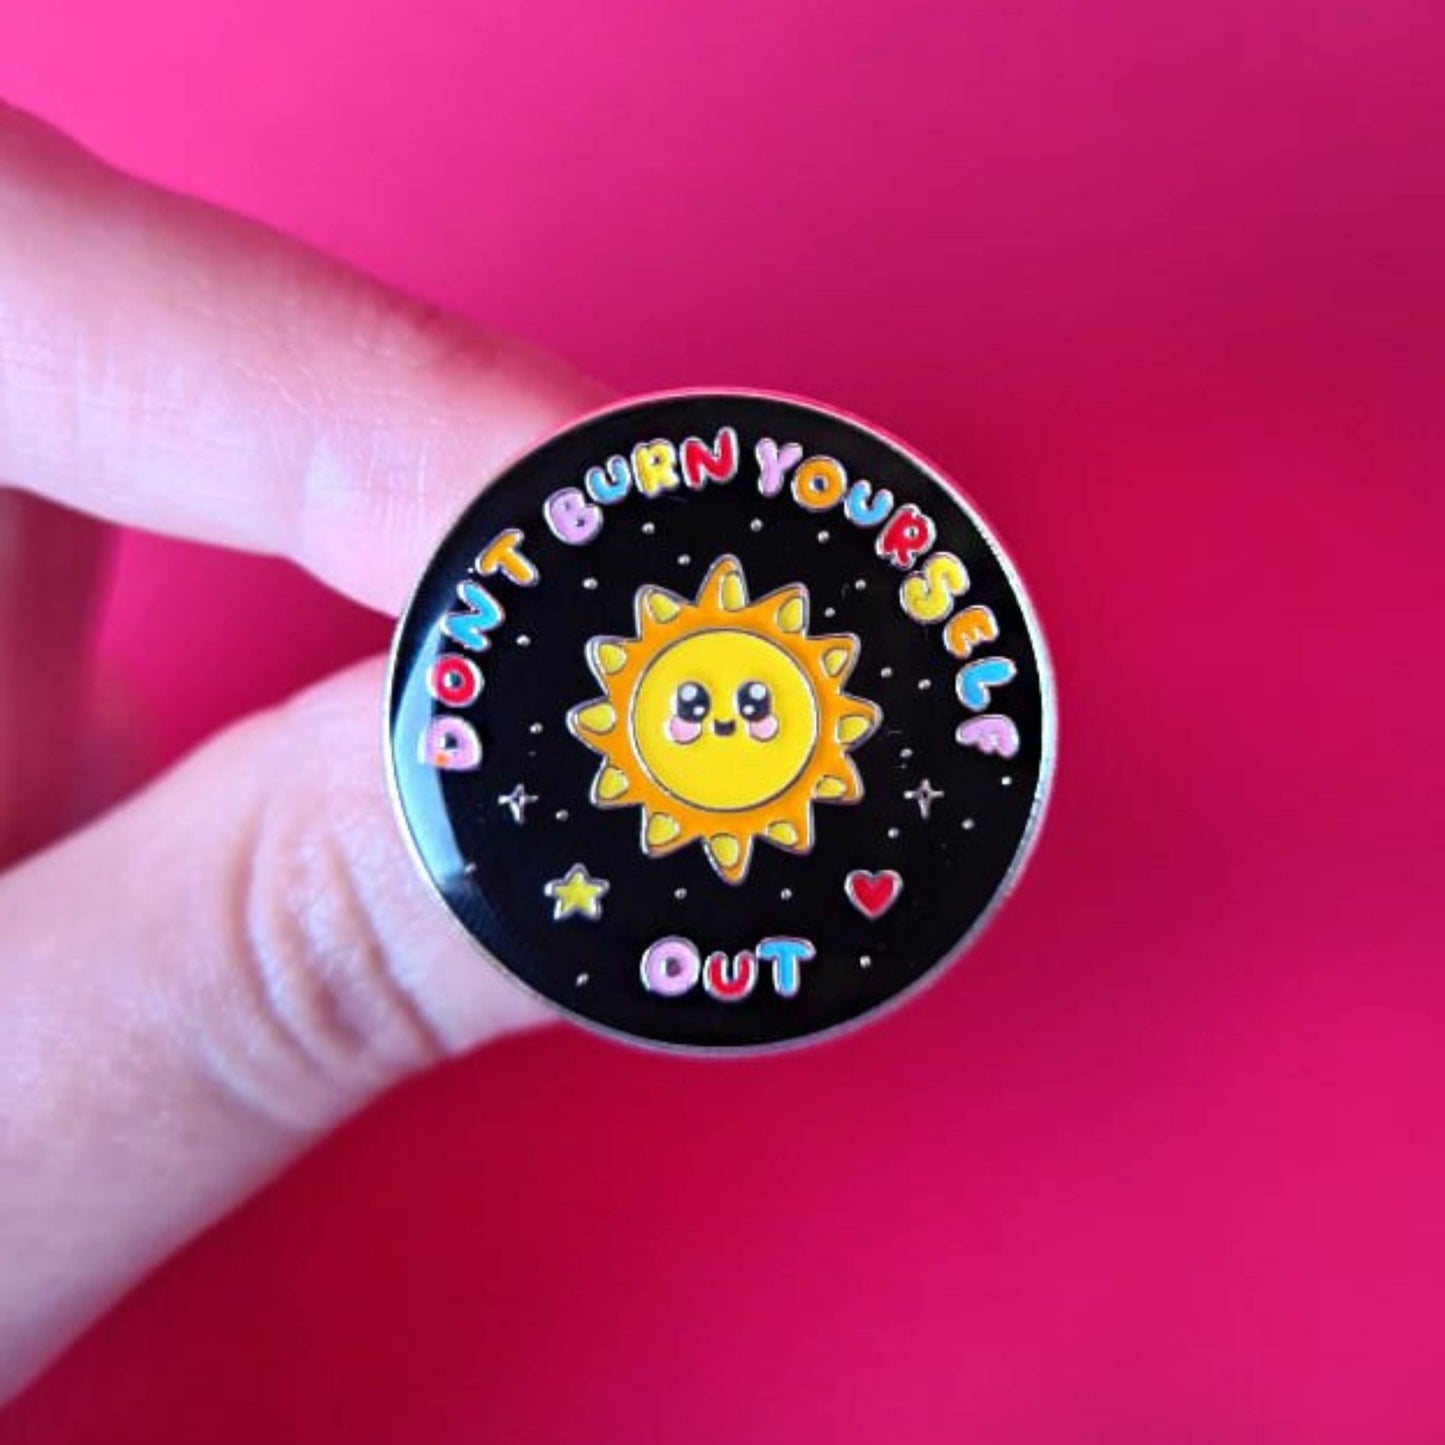 The Don't Burn Yourself Out Sunshine Enamel Pin being held over a red background. The circle shaped pin badge is a black base with a yellow smiling sunshine in the centre with rainbow text surrounding it reading 'don't burn yourself out' along with a red heart, yellow star and silver sparkles. The design was created as a gentle reminder to practise self care.